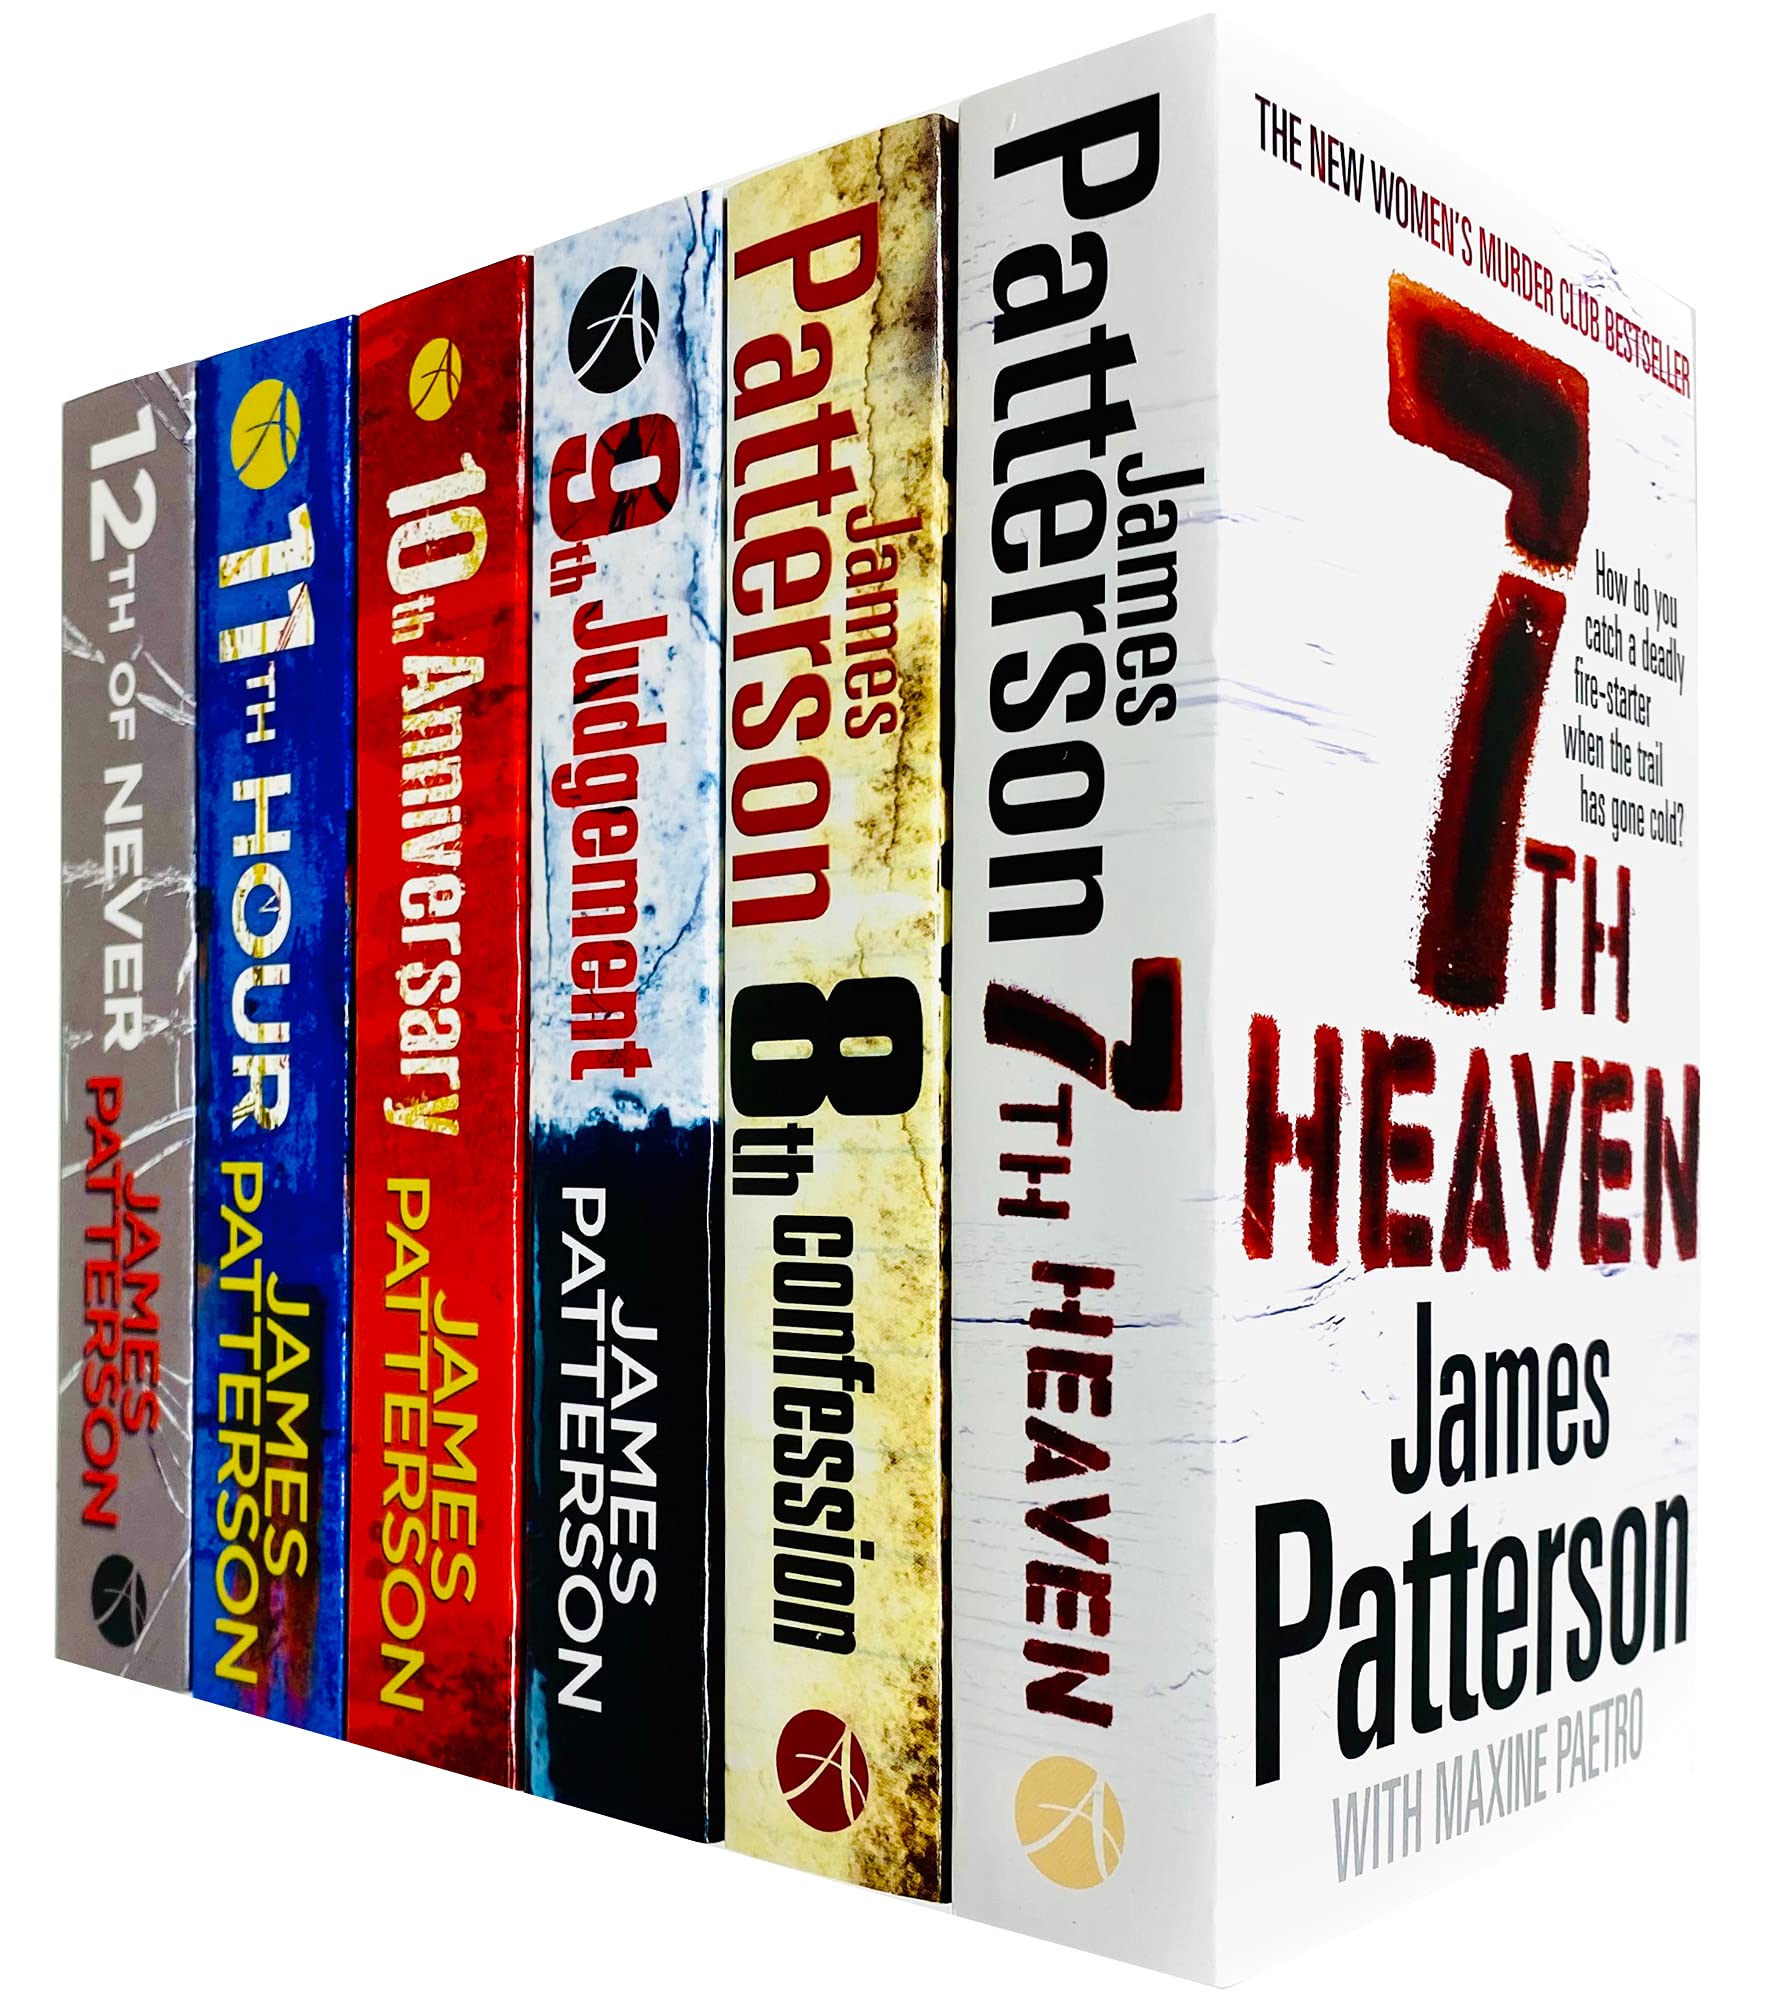 James Patterson Womens Murder Club Series 2 Collection 6 Books Set (Books 7 To 12) - Lets Buy Books